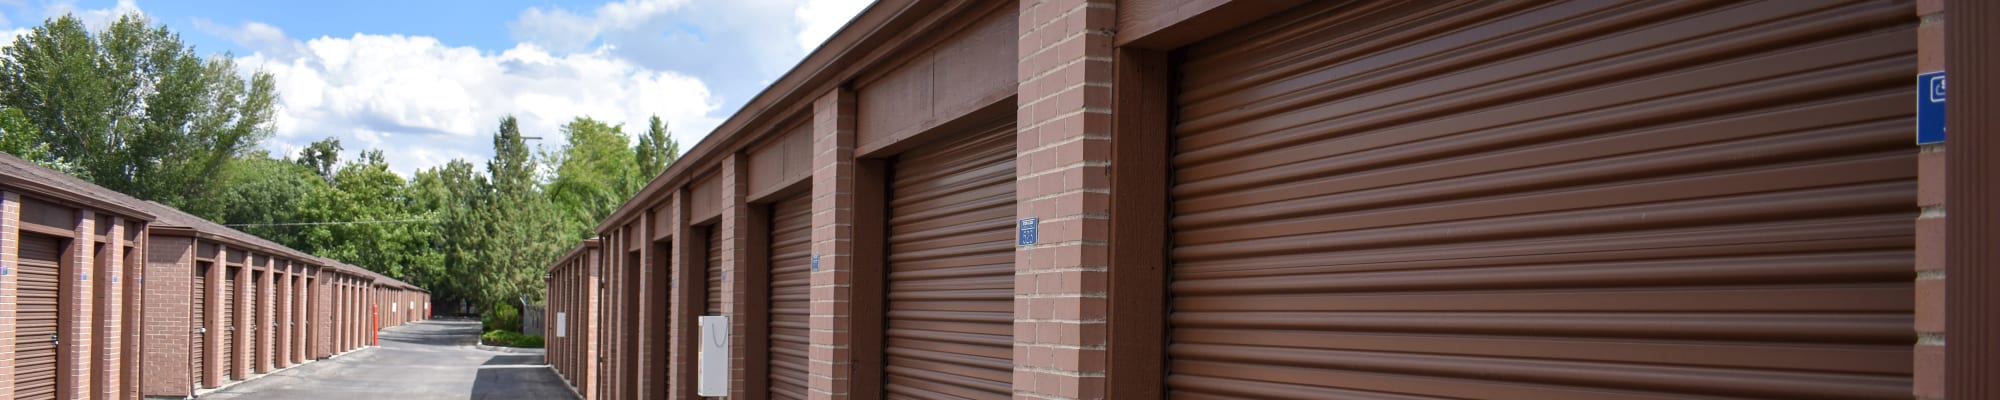 Unit sizes and prices at STOR-N-LOCK Self Storage in Boise, Idaho